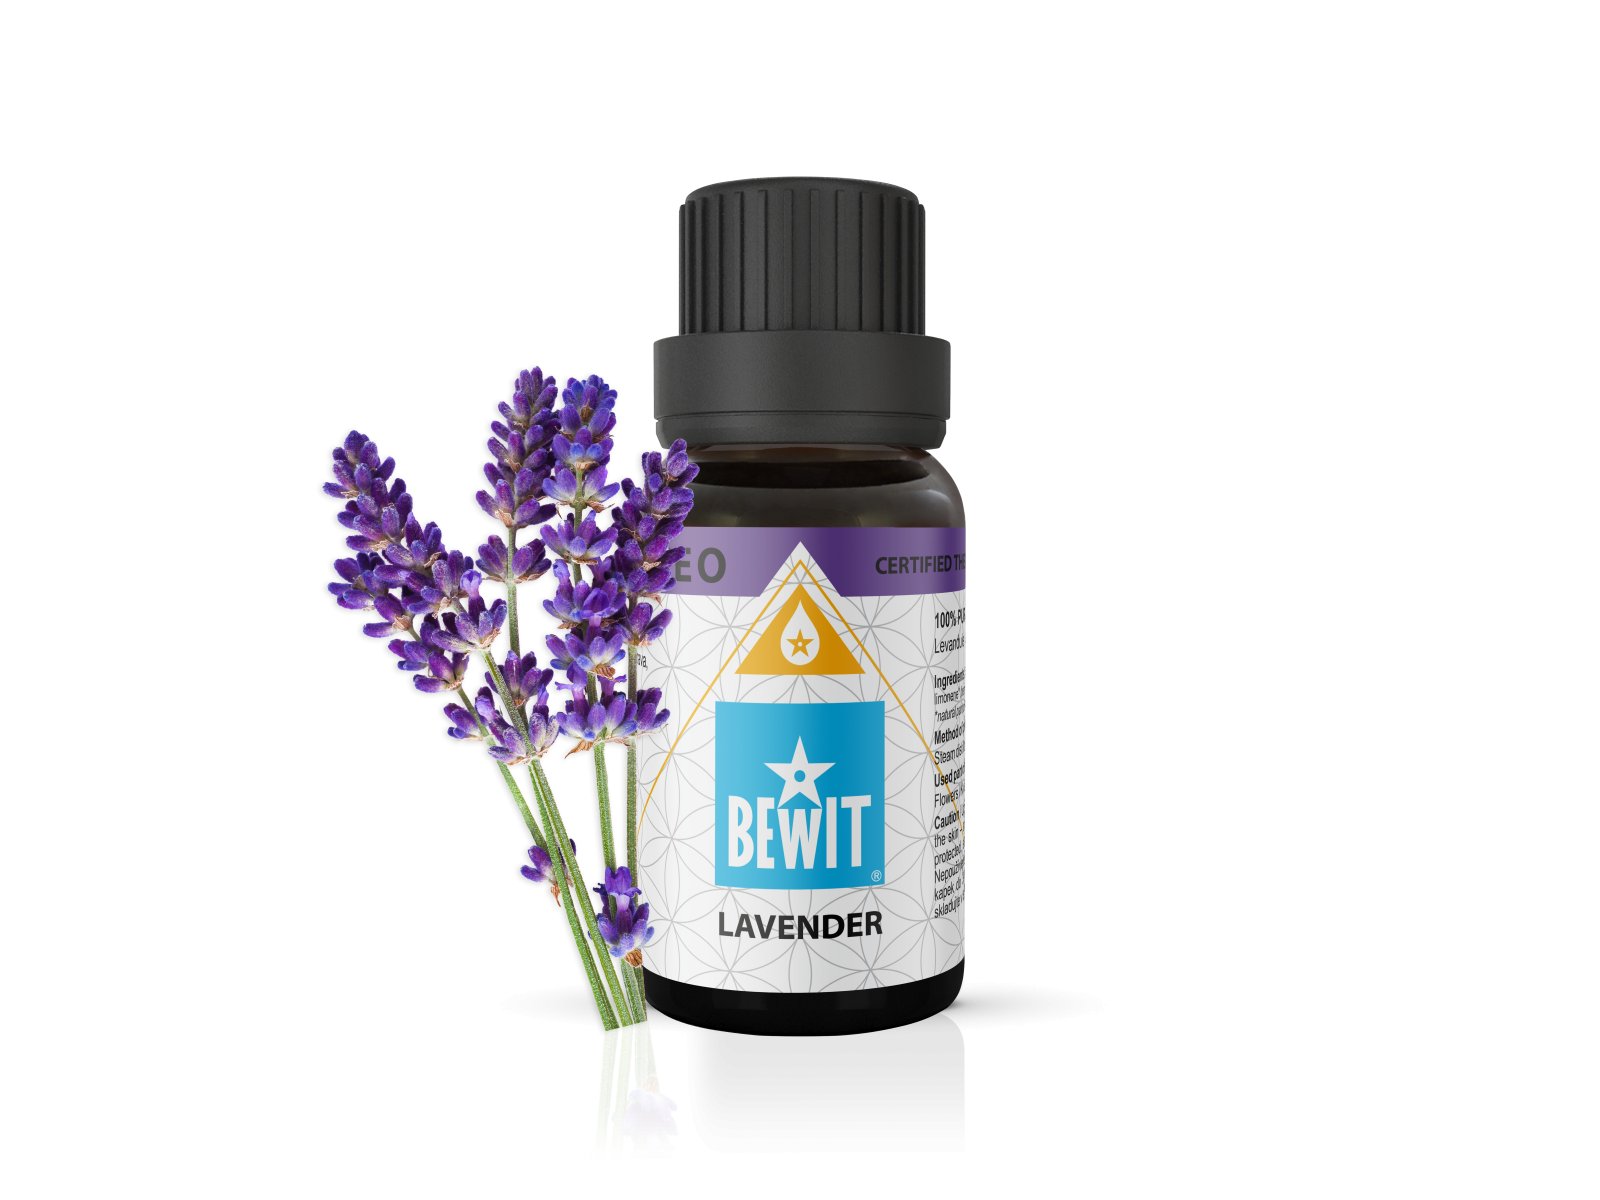 BEWIT Lavender - 100% pure and natural CTEO® essential oil